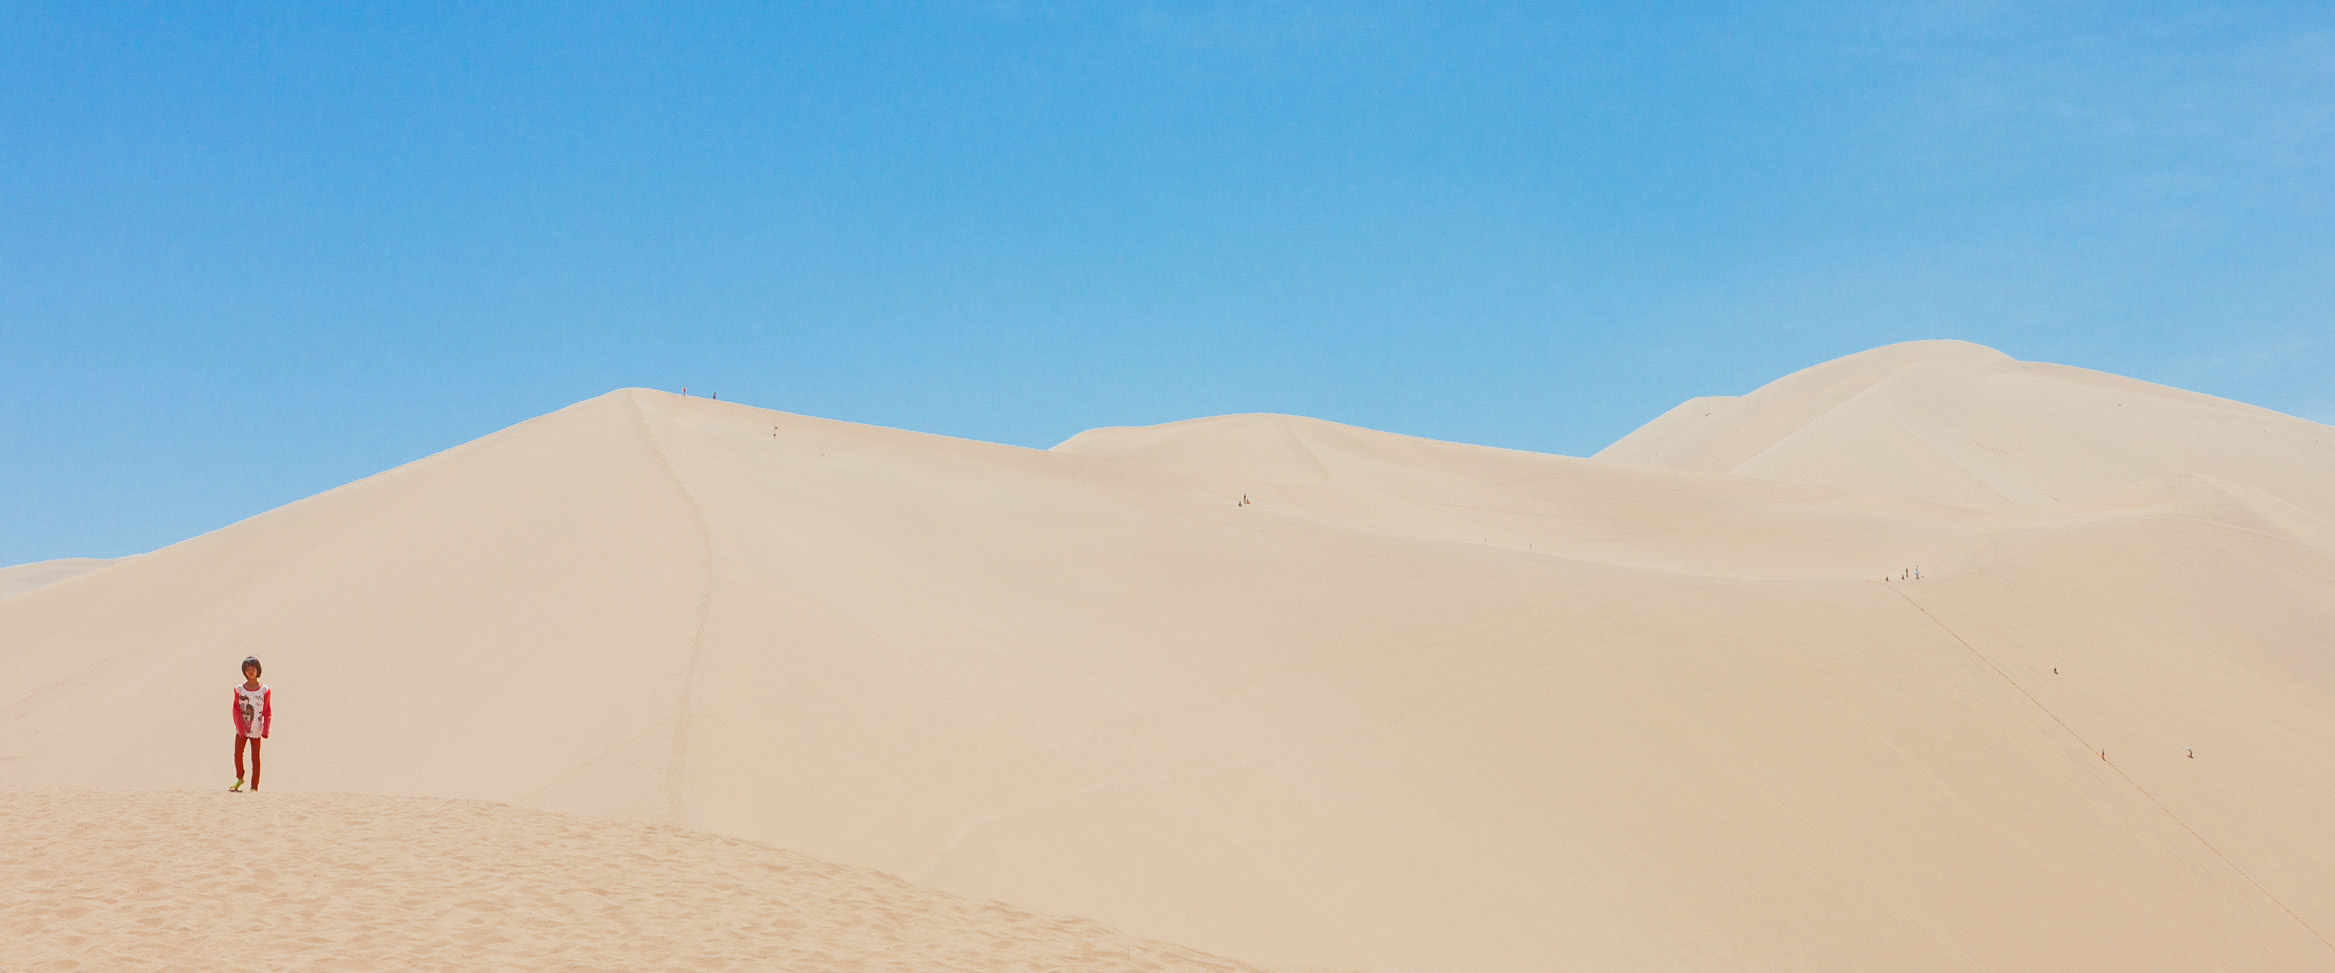 A Little Boy with Giant Sand Dunes